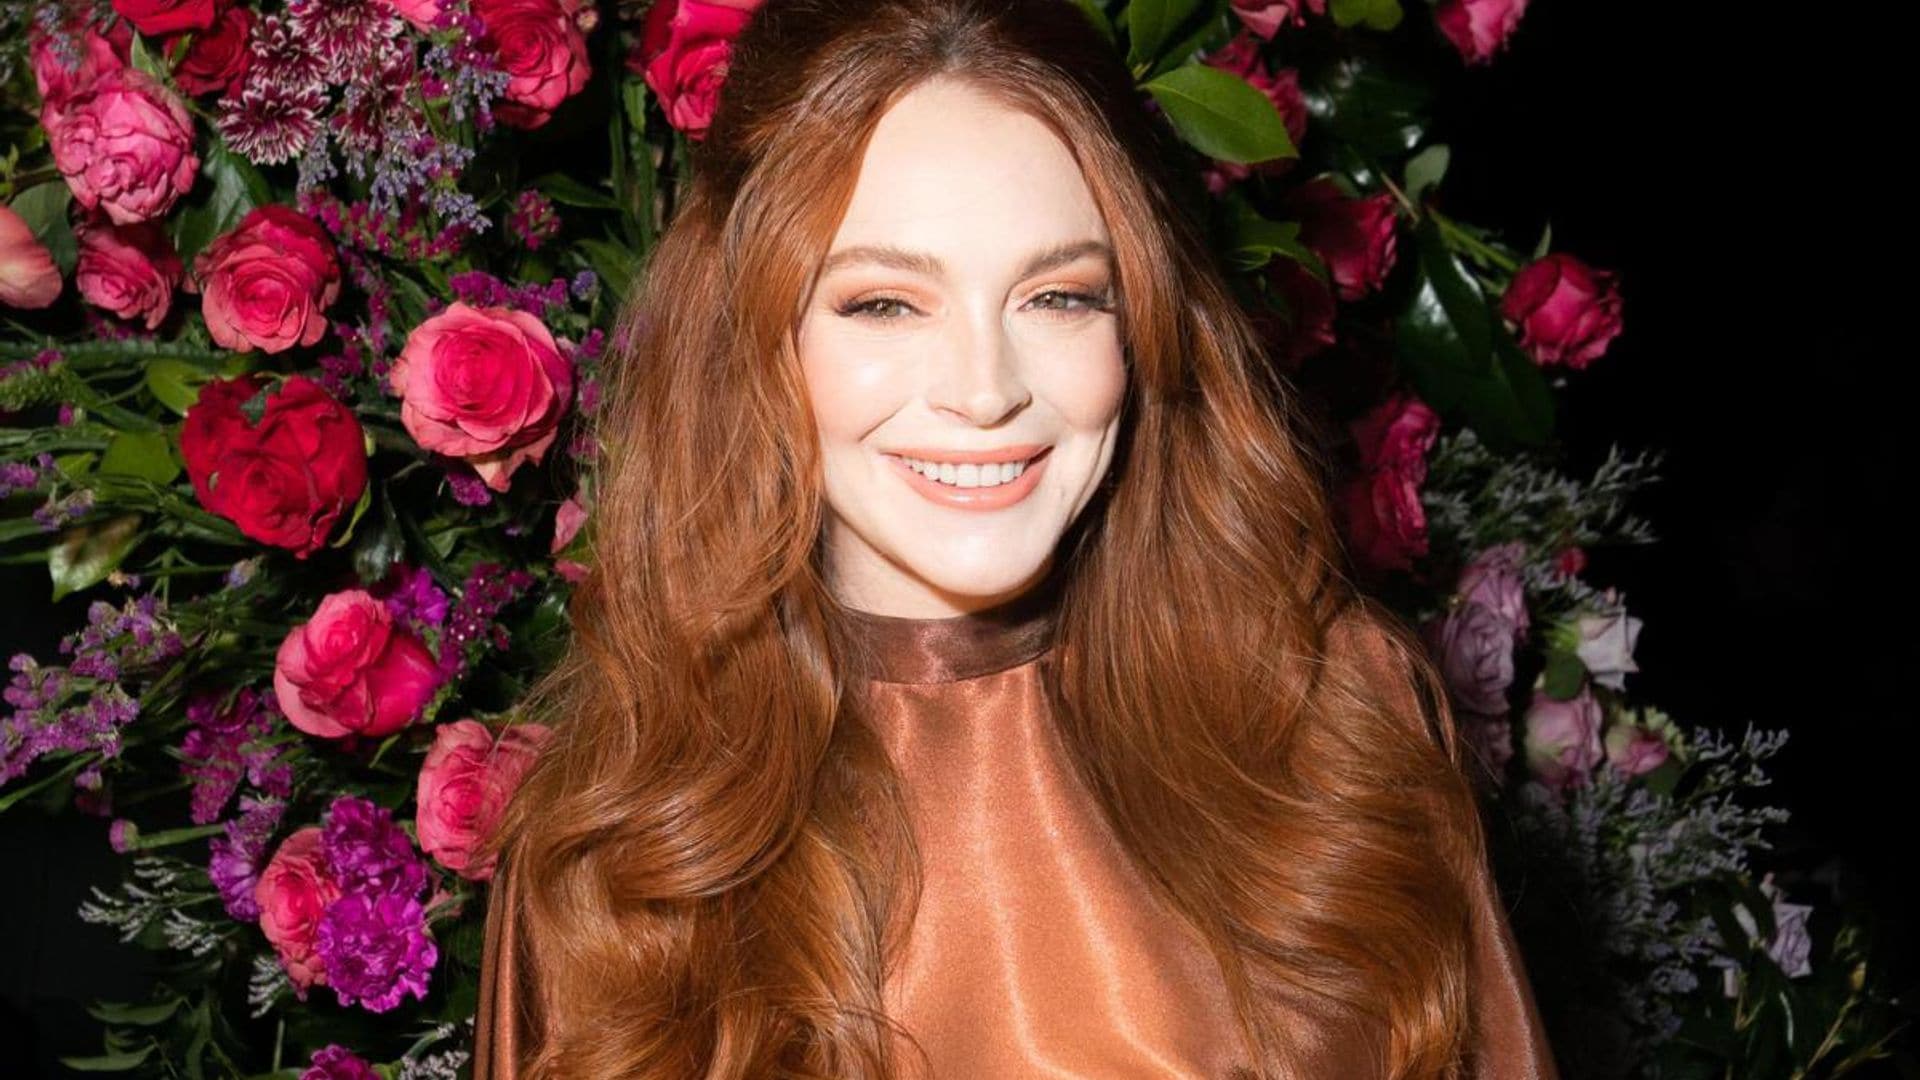 Lindsay Lohan is pregnant with her first child: ‘We are blessed and excited!’